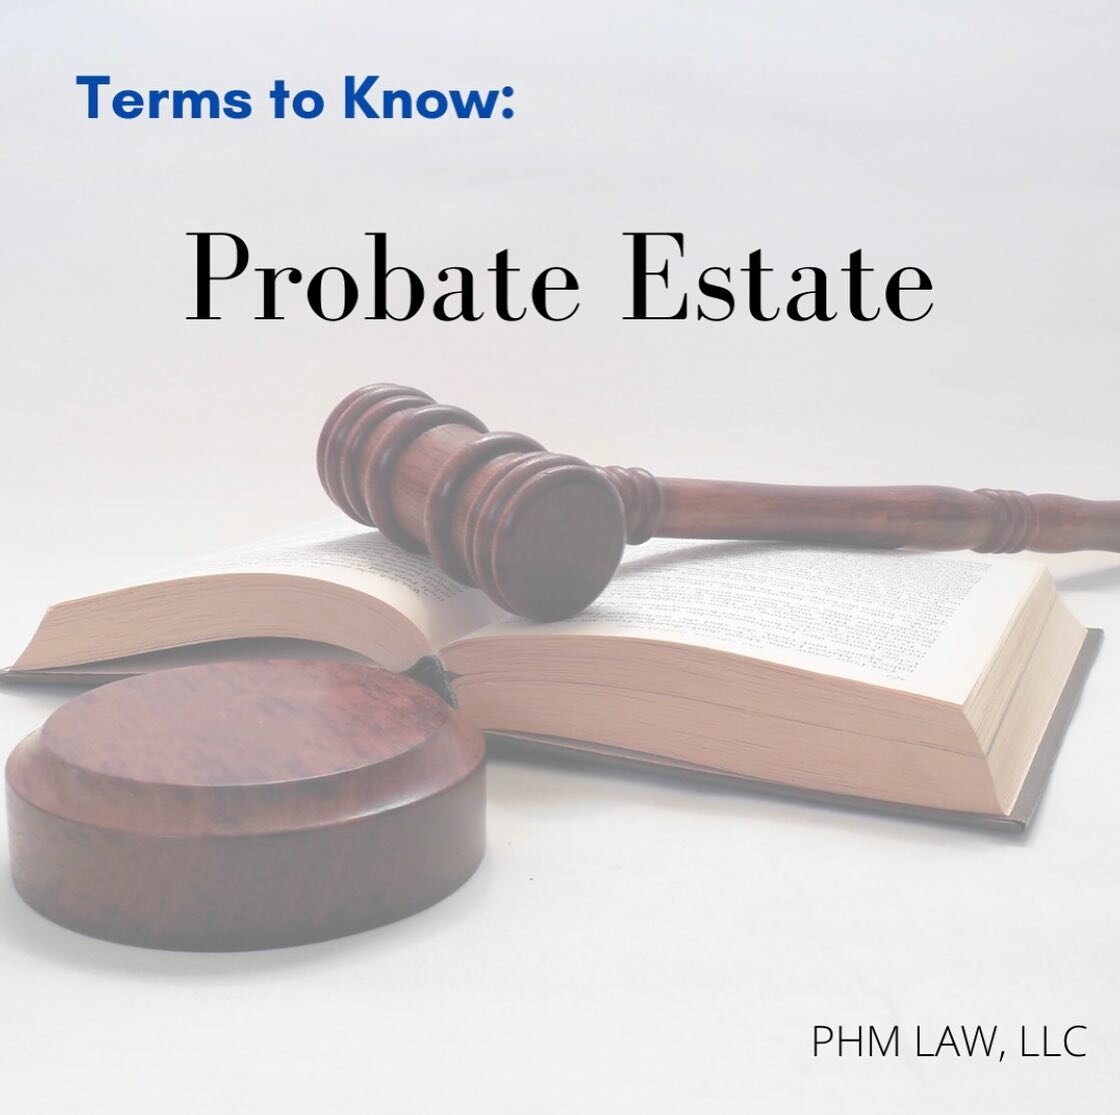 A person's &quot;probate estate&quot; or &quot;probate assets&quot; include assets that are in their name alone when they pass away. The terms of a valid Will set forth how  probate assets are distributed. Without a will, the law will determine how p